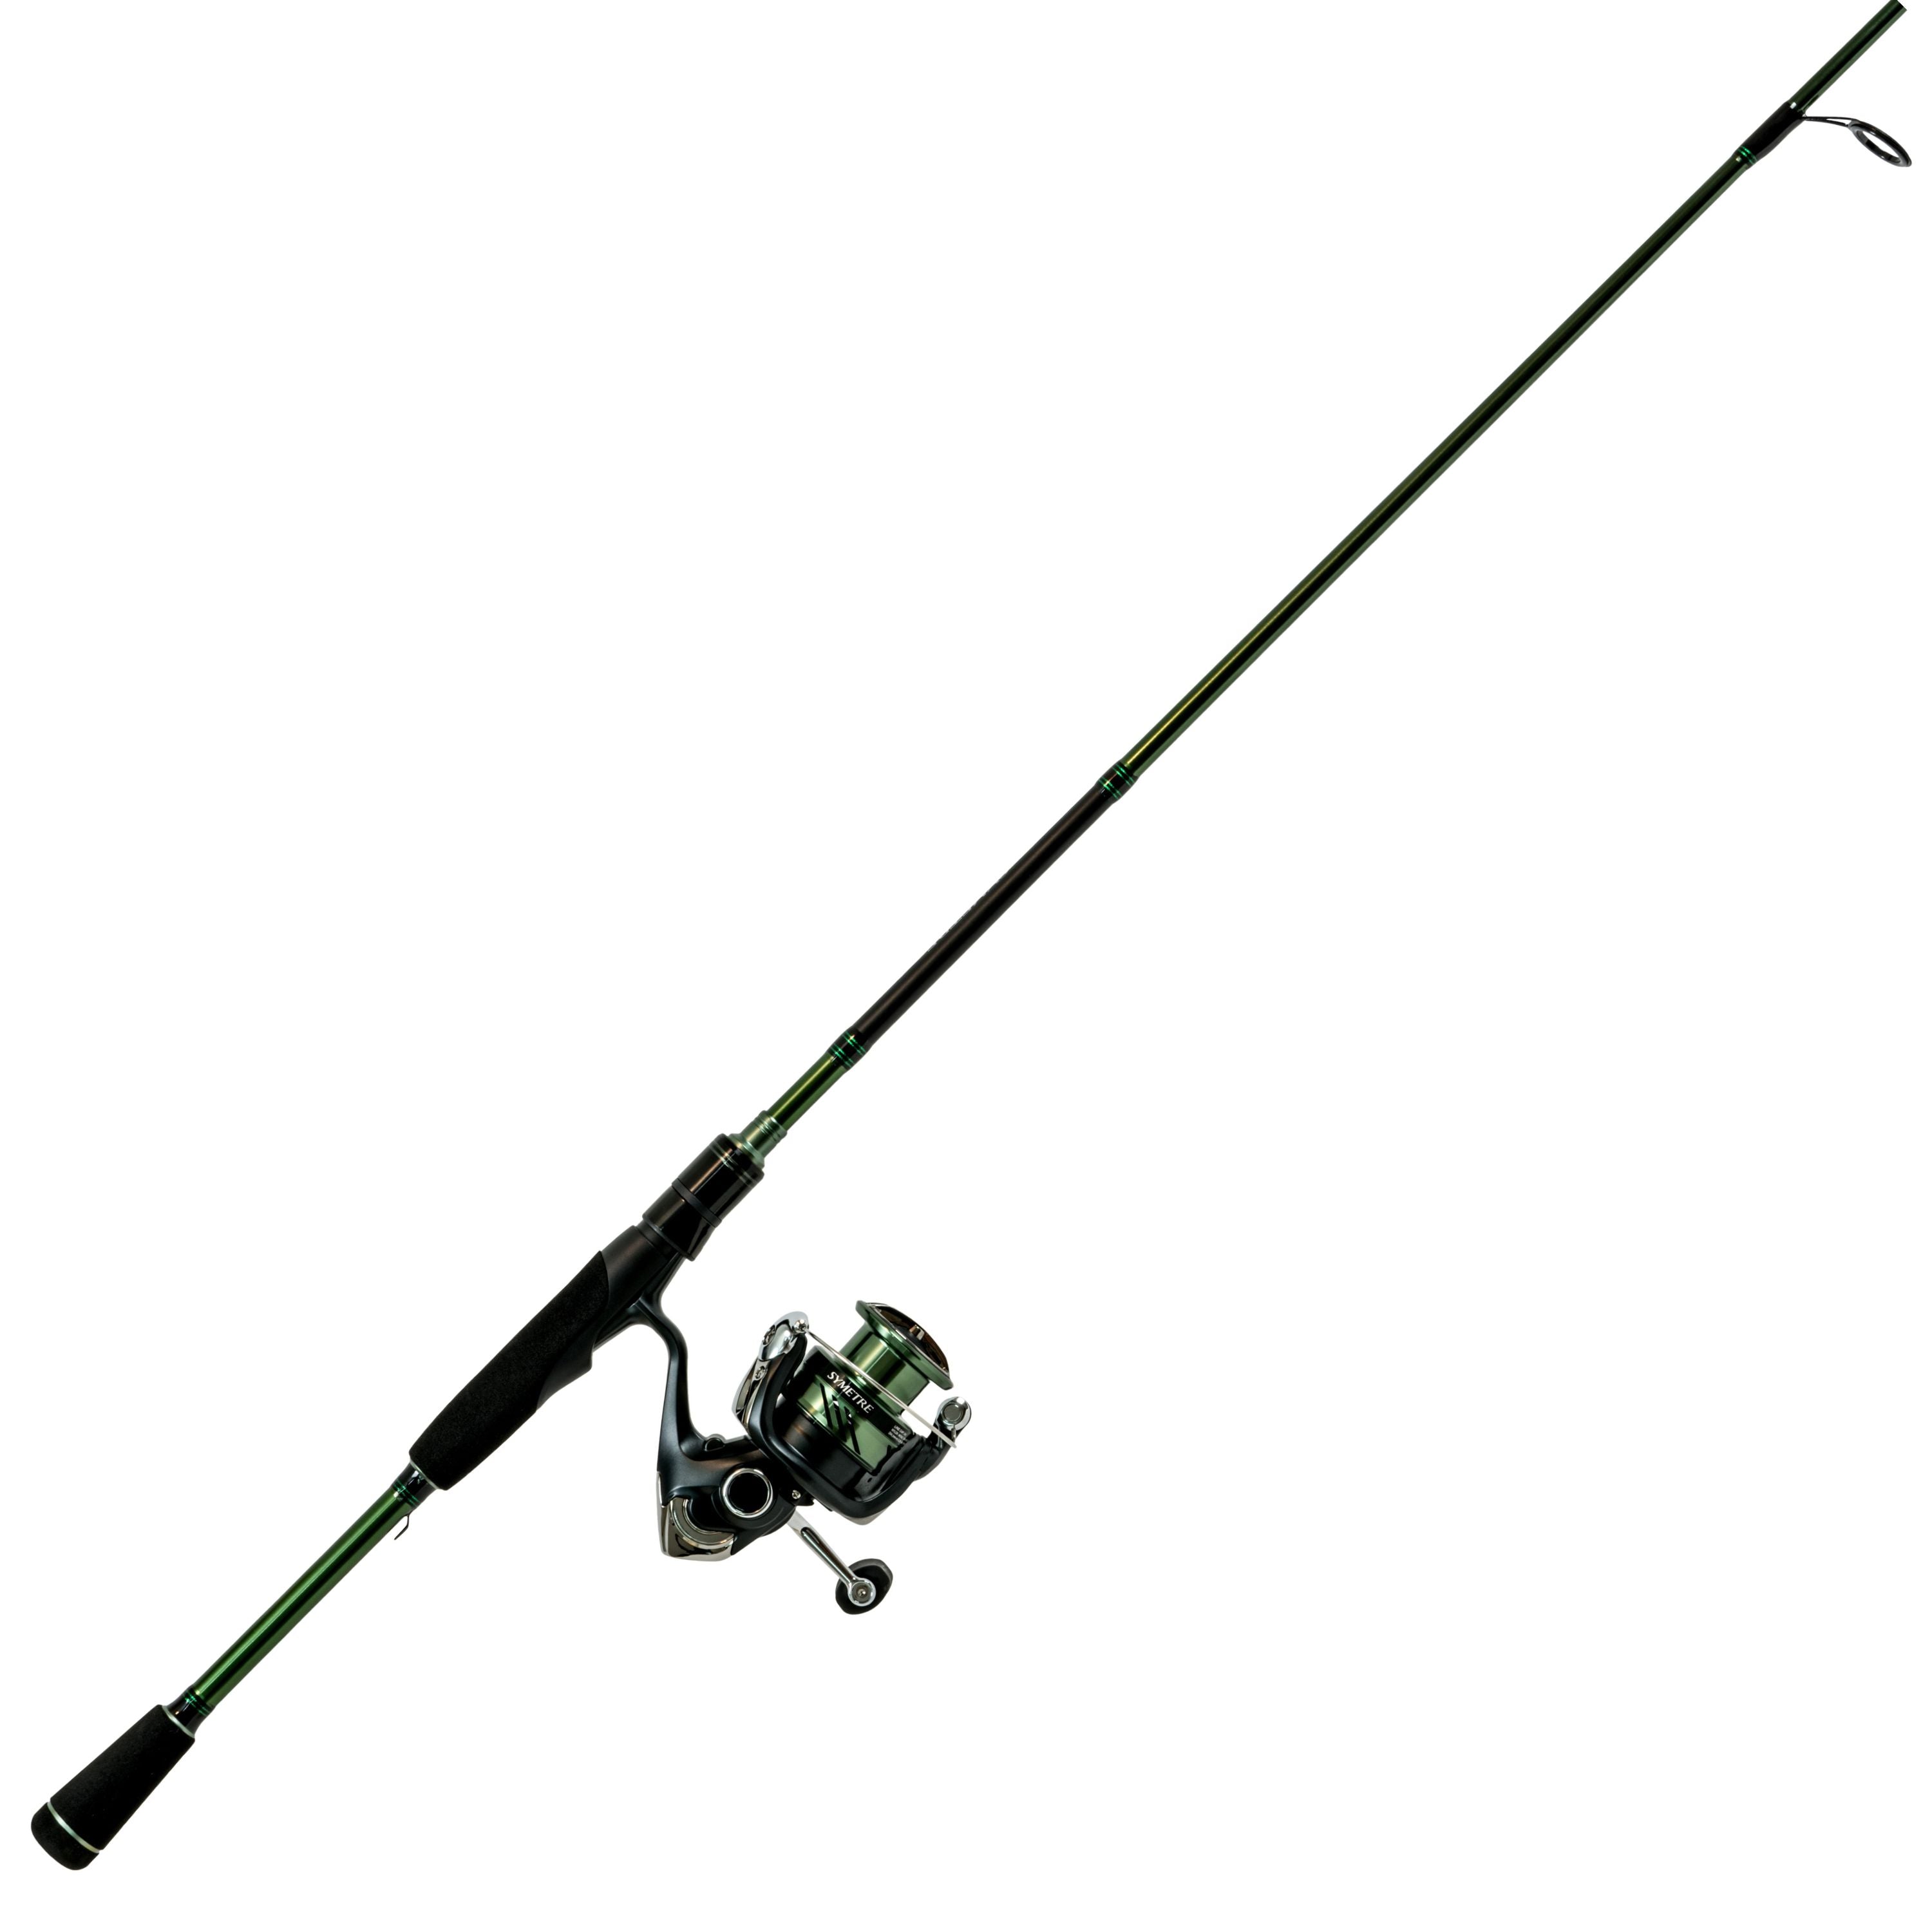 Symetre Spinning combo 2500 reel — Groupe Pronature